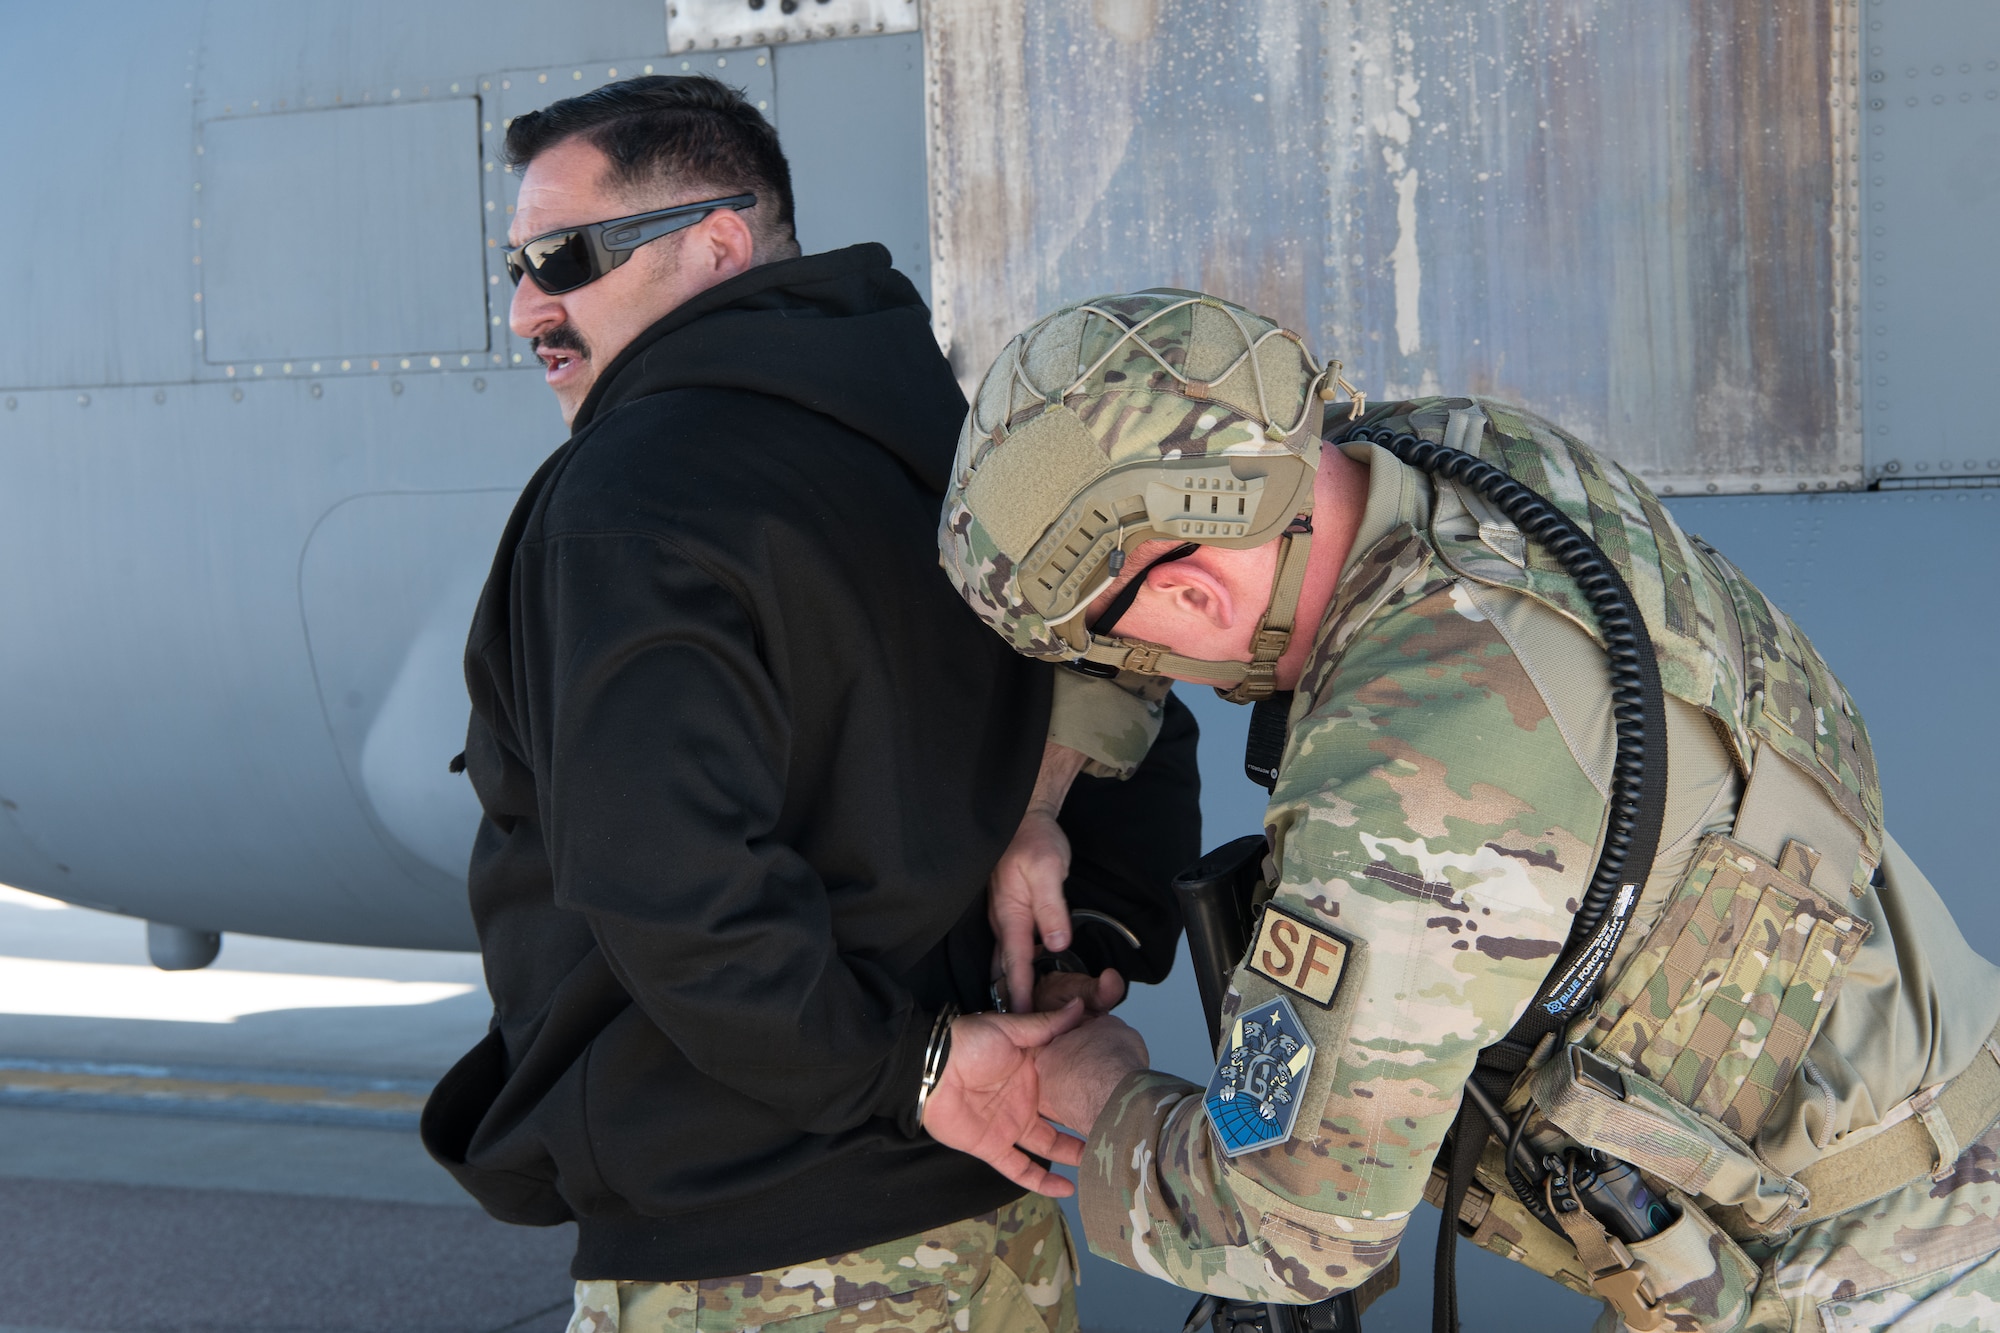 A uniformed Airman handcuffing a man wearing a black sweatshirt in front of a C-130 aircraft.